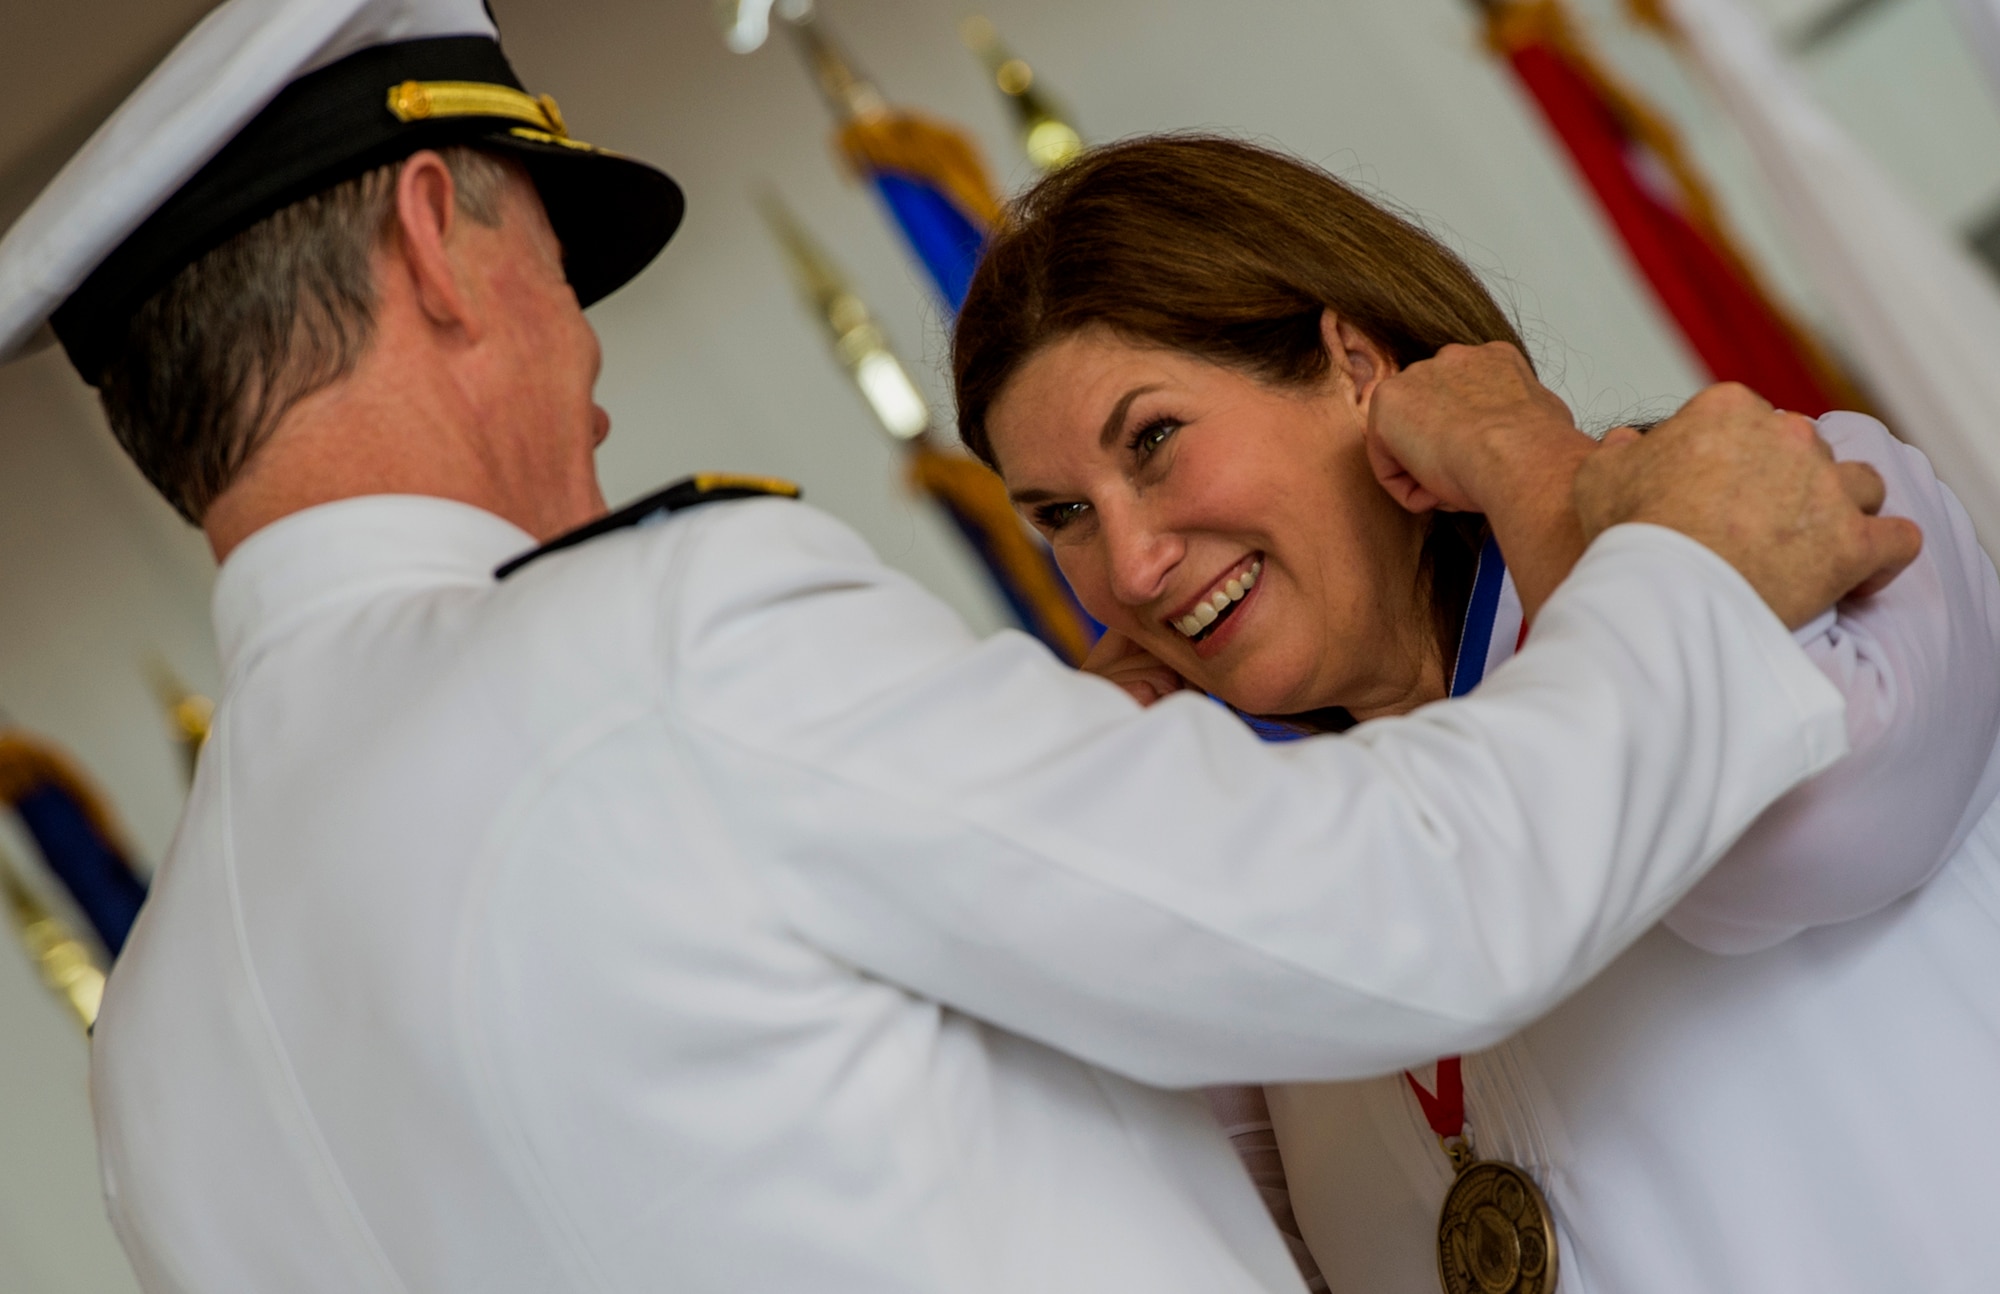 Adm. William McRaven, U.S. Special Operations Command commander, presents Donna Fiel a medal for her service to the special operations community during her husband's retirement ceremony on Hurlburt Field, Fla., July 3, 2014. Lt. Gen. Eric Fiel, former Air Force Special Operations Command commander, retired after 33 years of distinguished service. (U.S. Air Force photo by Senior Airman Christopher Callaway)